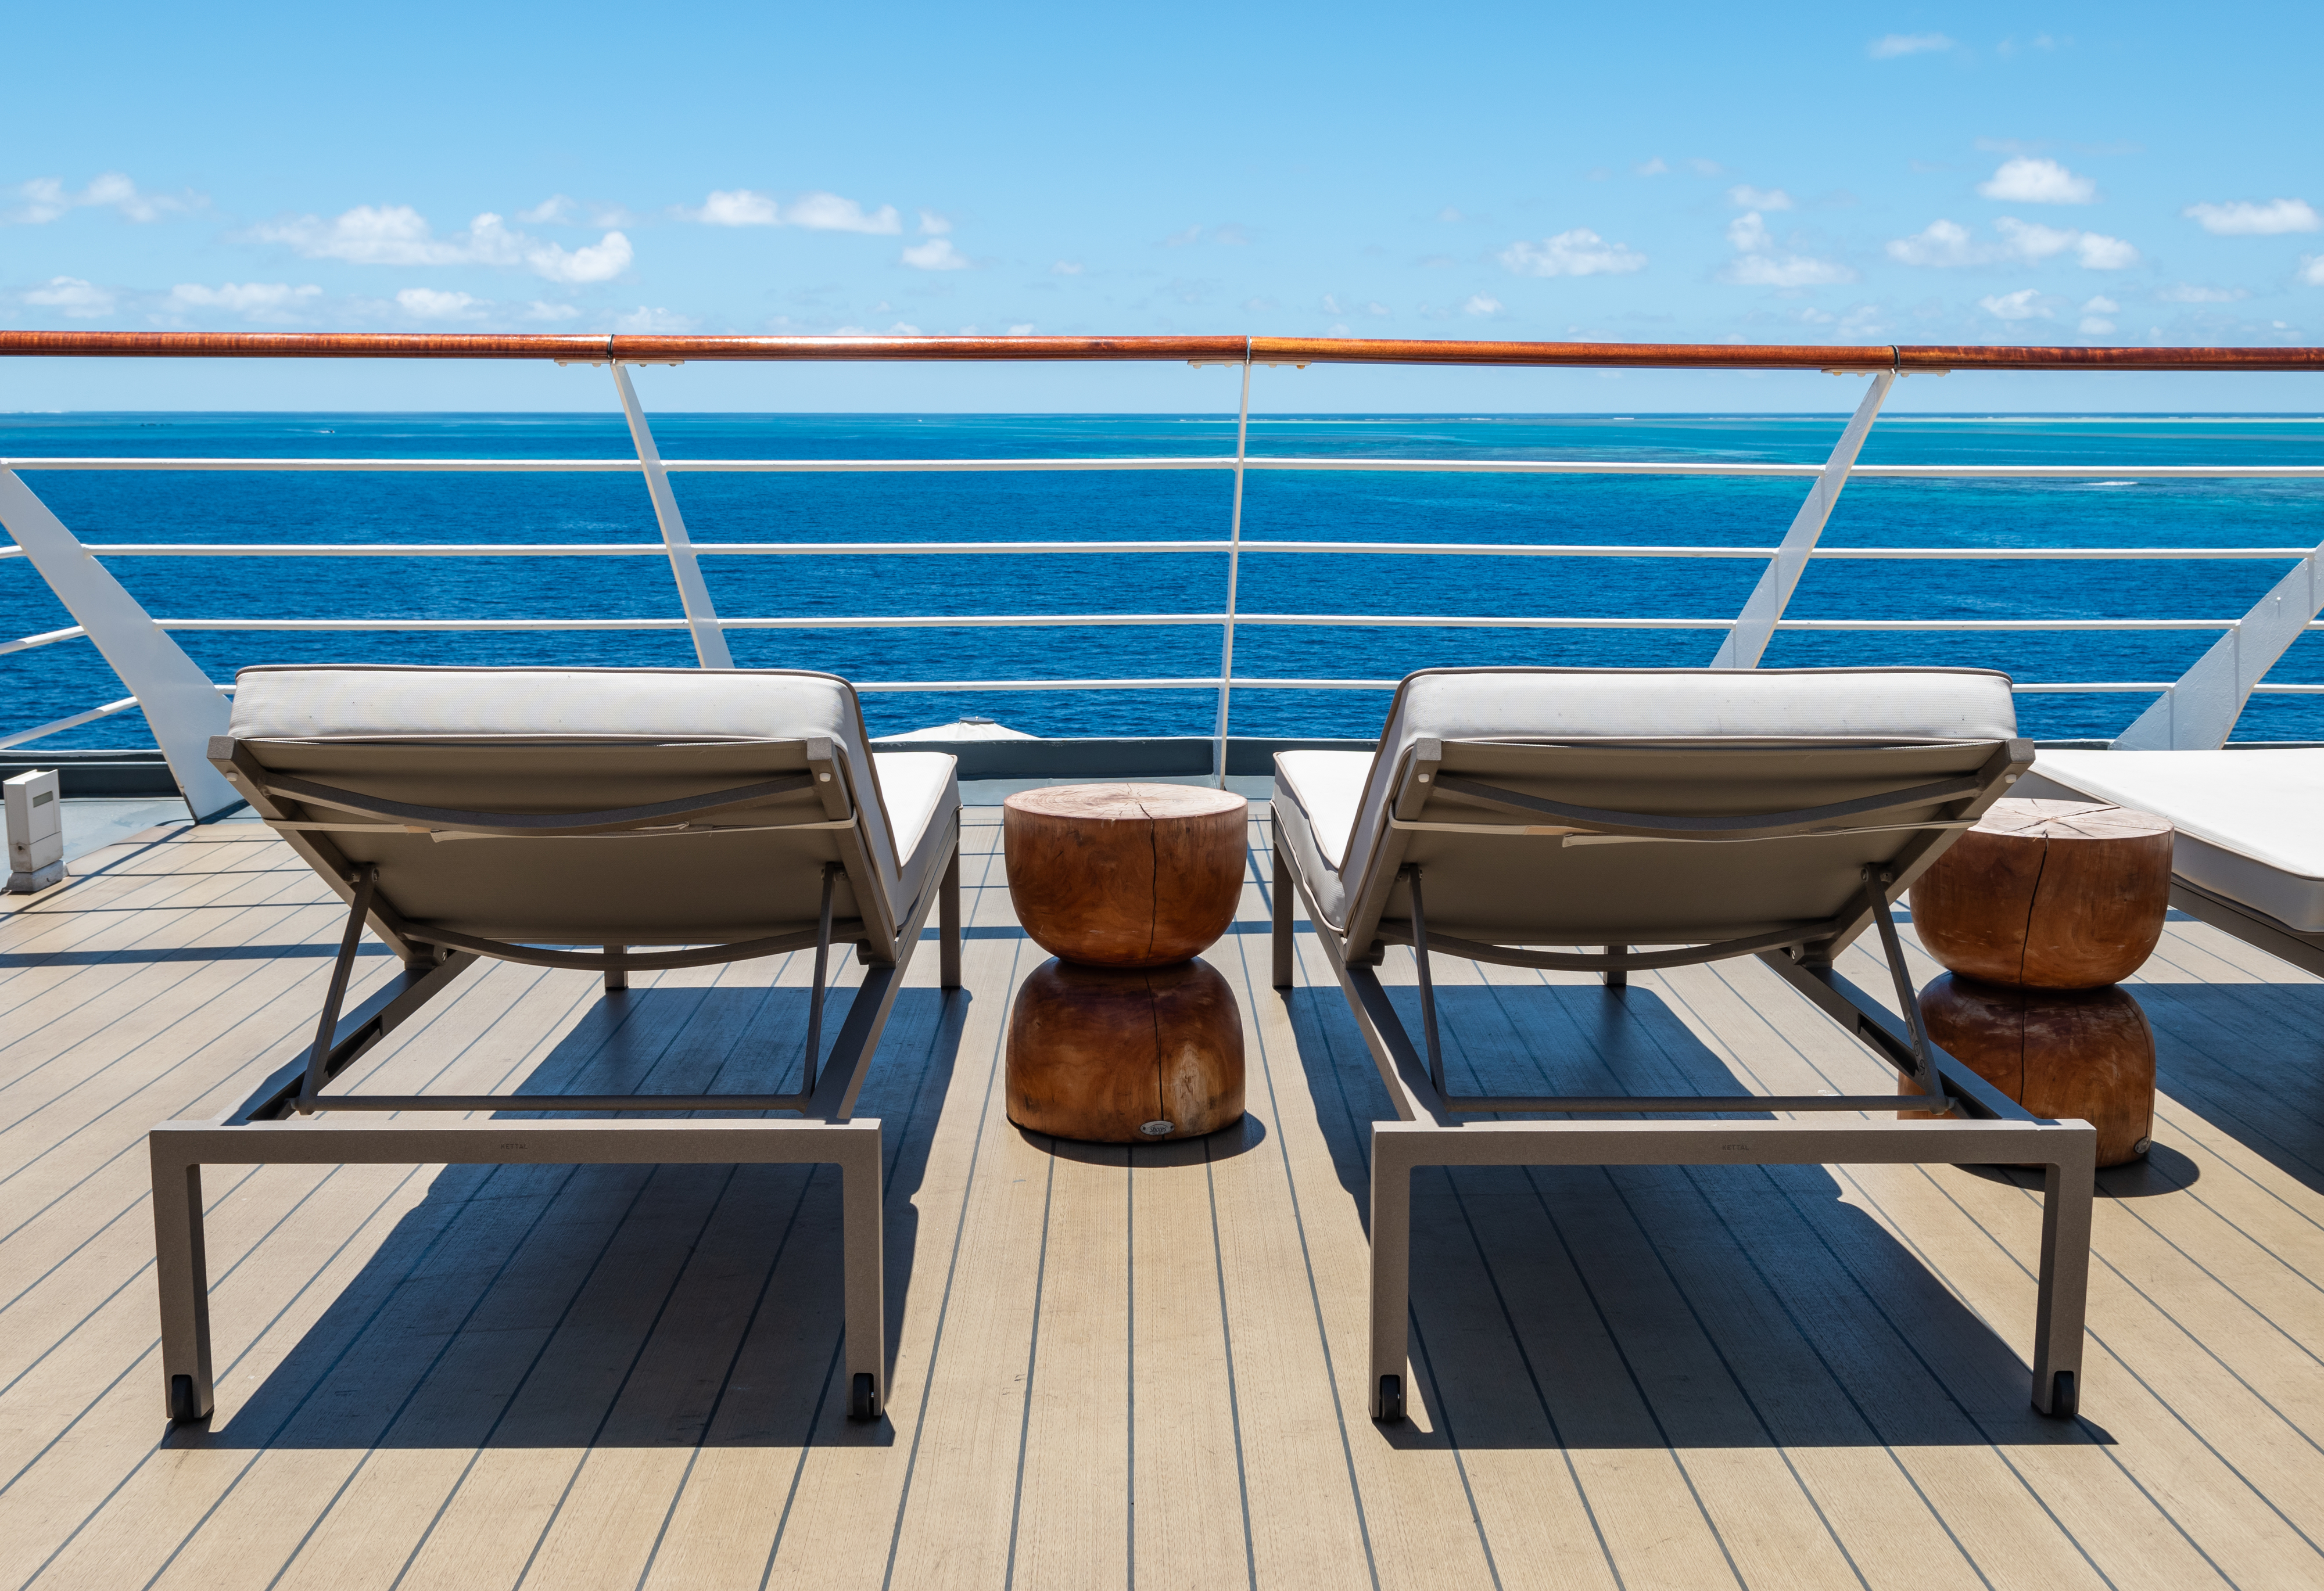 Two lounge chairs and small wooden stools facing the sea on a sunny cruise ship deck. Blue ocean stretches out to the horizon. No people are present